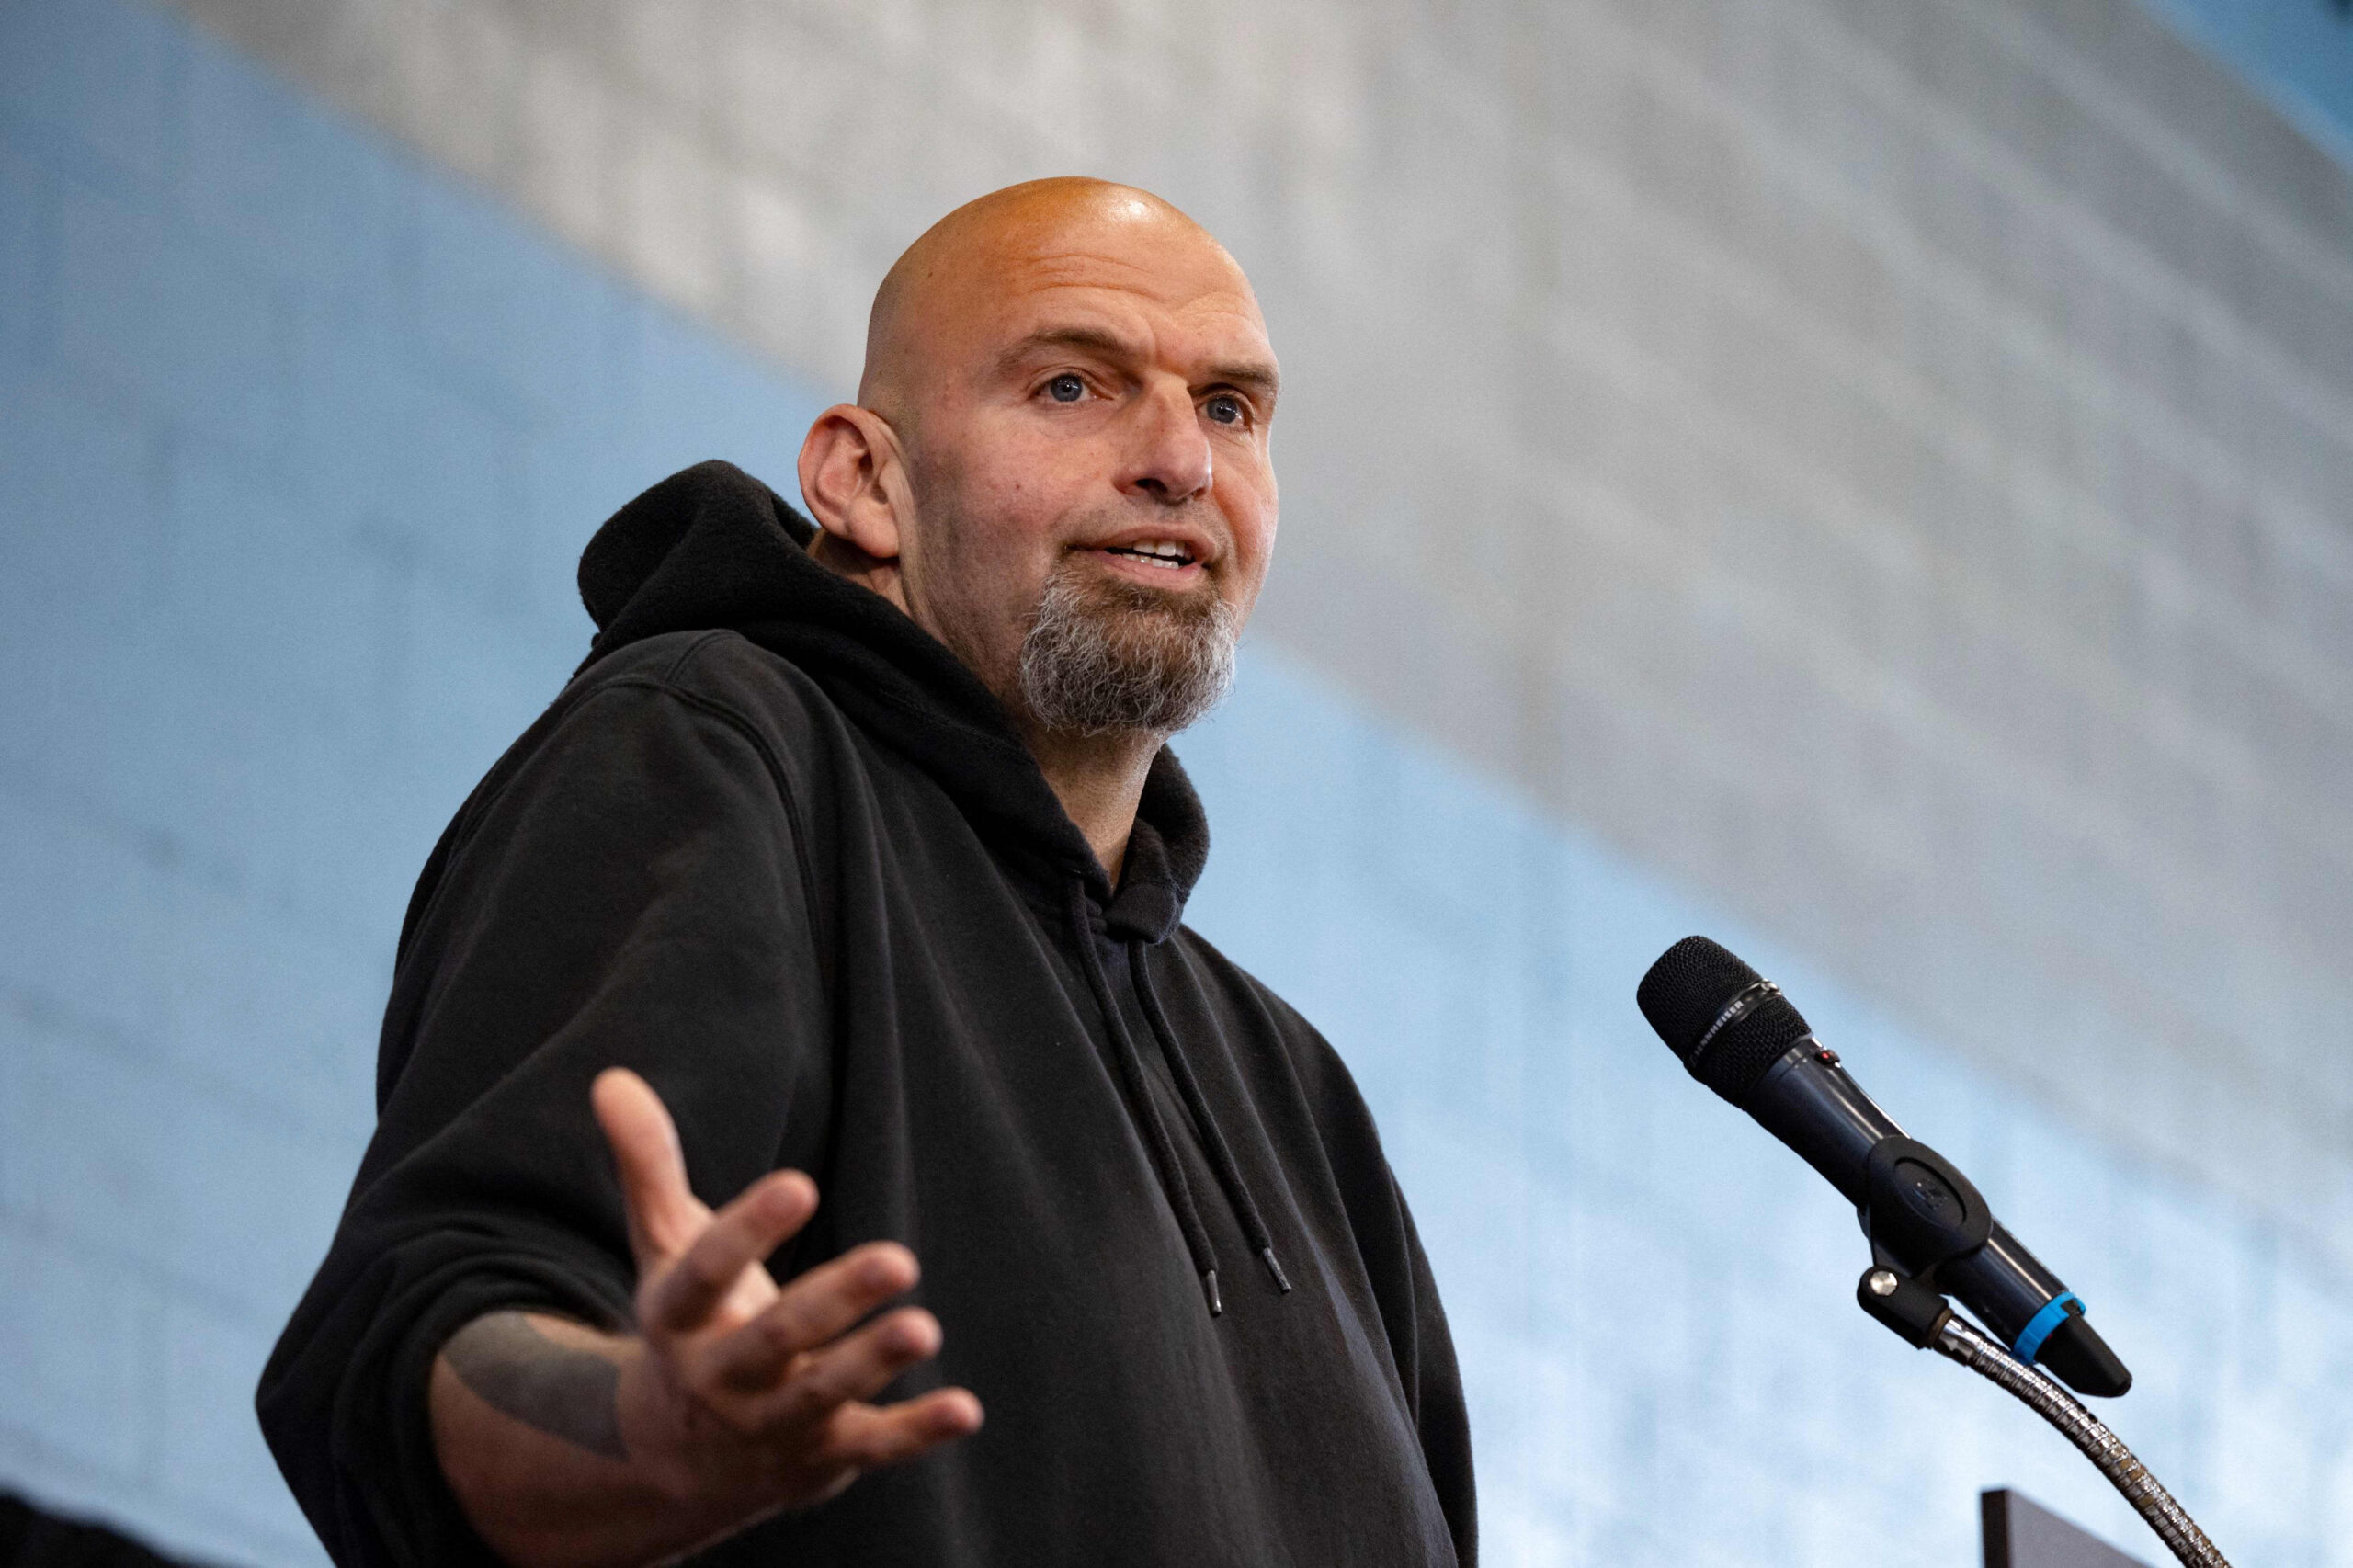 An Inside Look at John Fetterman and How His Stroke Affected His Campaign